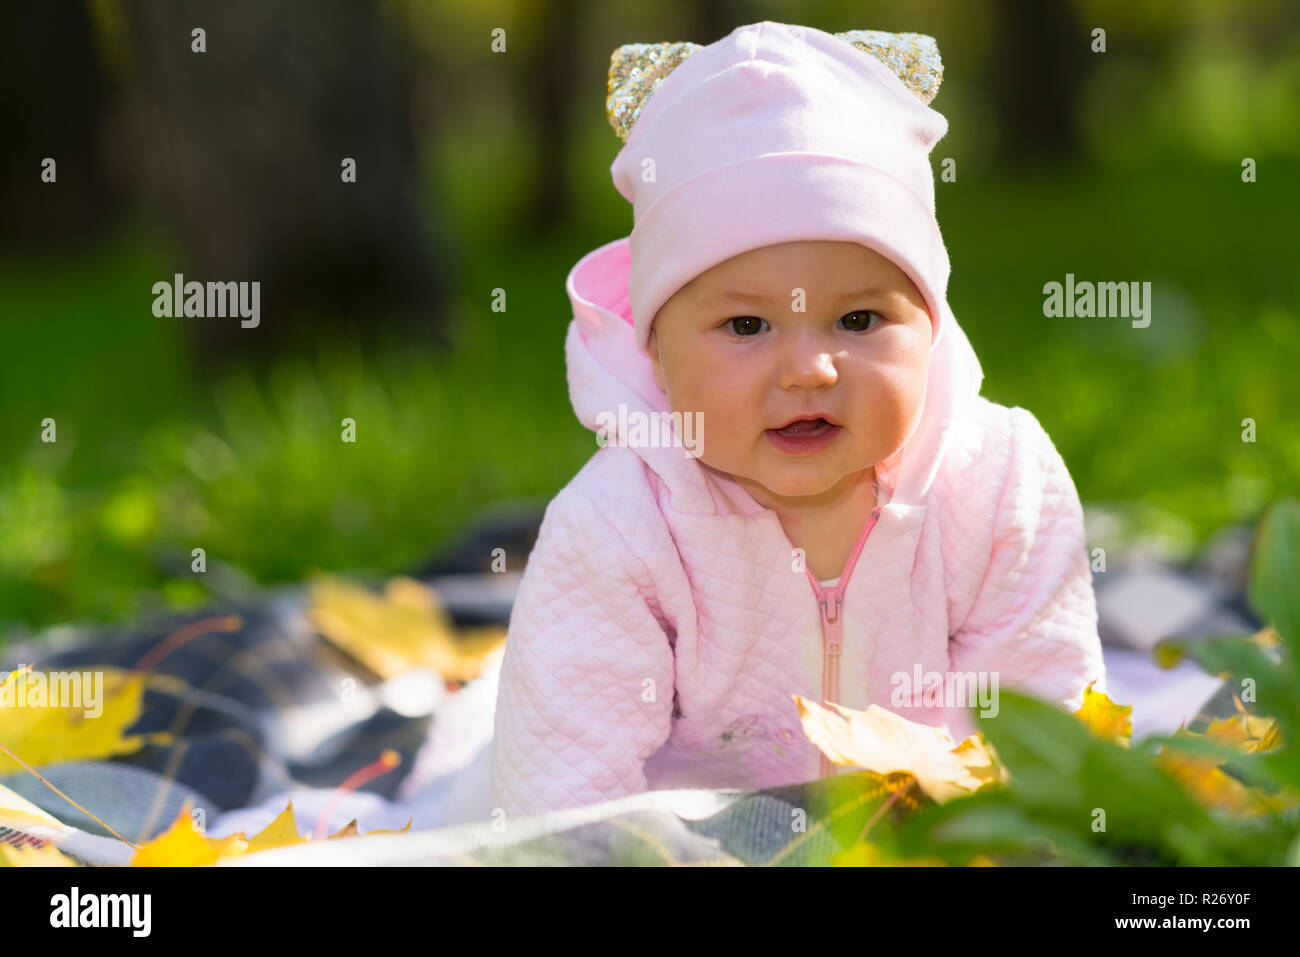 https://c8.alamy.com/comp/R26Y0F/curious-little-baby-girl-watching-the-camera-raising-herself-up-on-her-arms-as-she-crawls-over-a-blanket-on-the-brass-in-an-autumn-park-R26Y0F.jpg